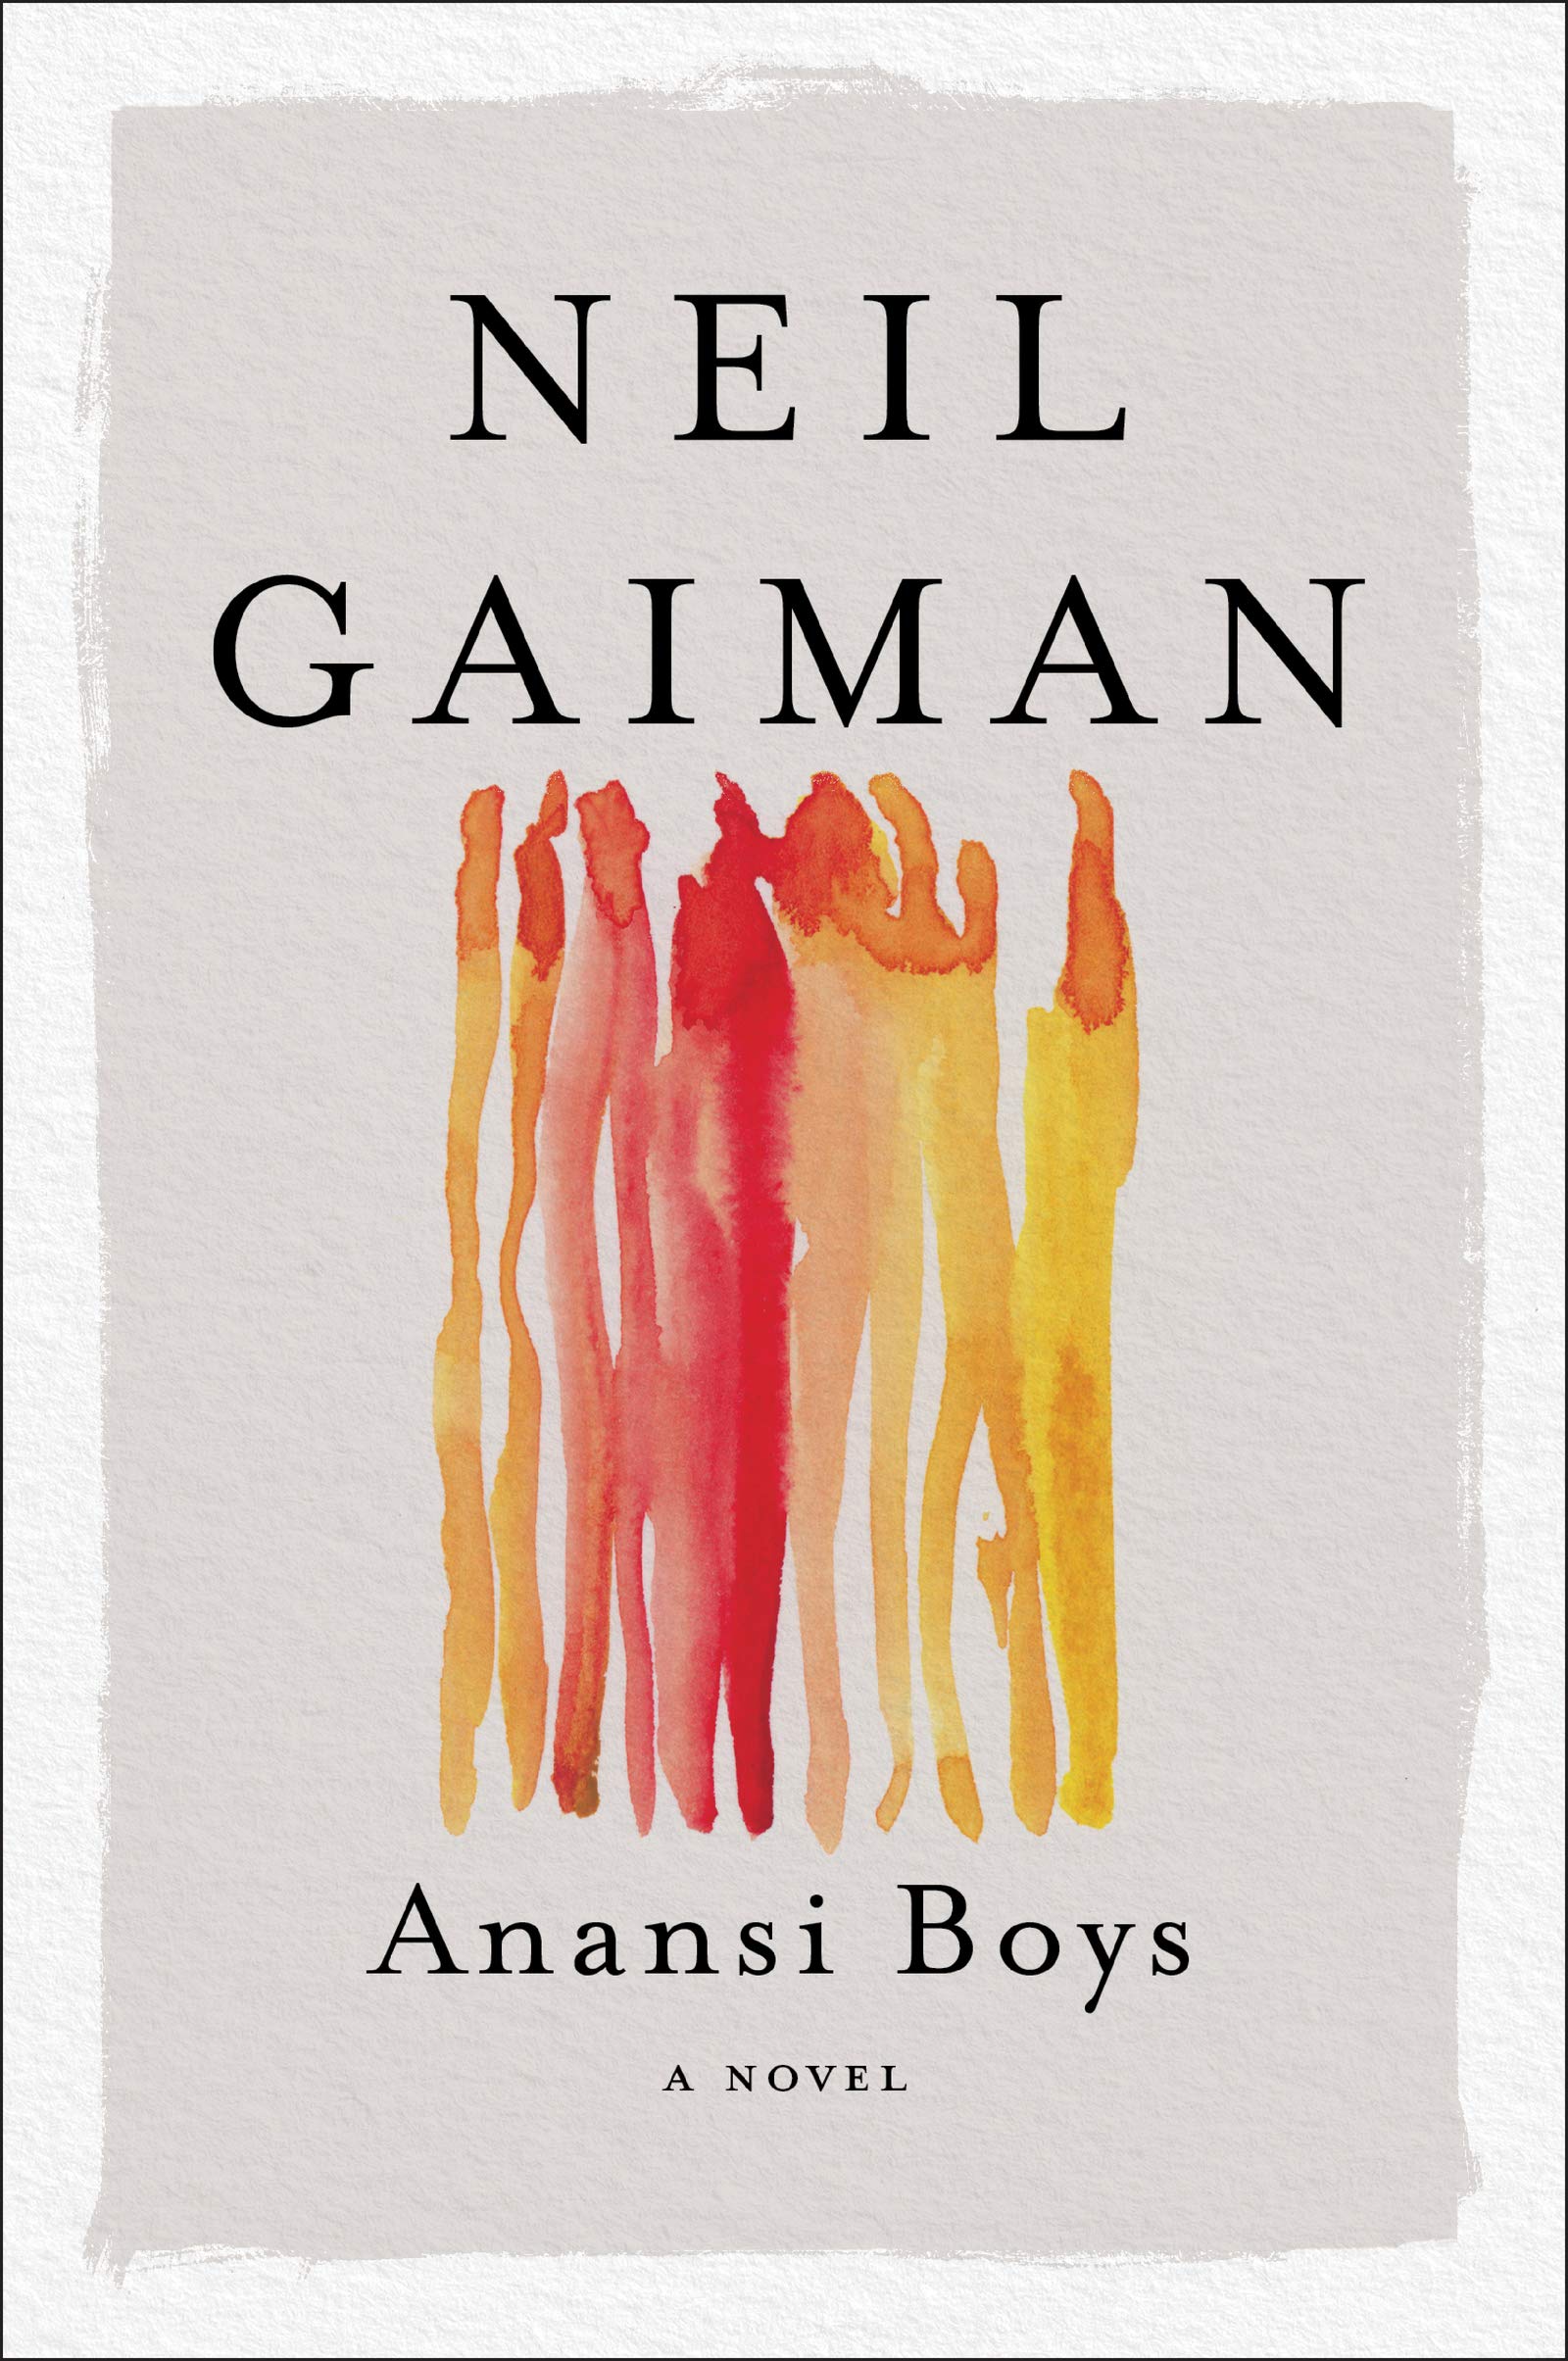 Neil Gaiman: Anansi Boys or The Ocean at the End of the Lane [Kindle Edition] $2 each ~ Amazon